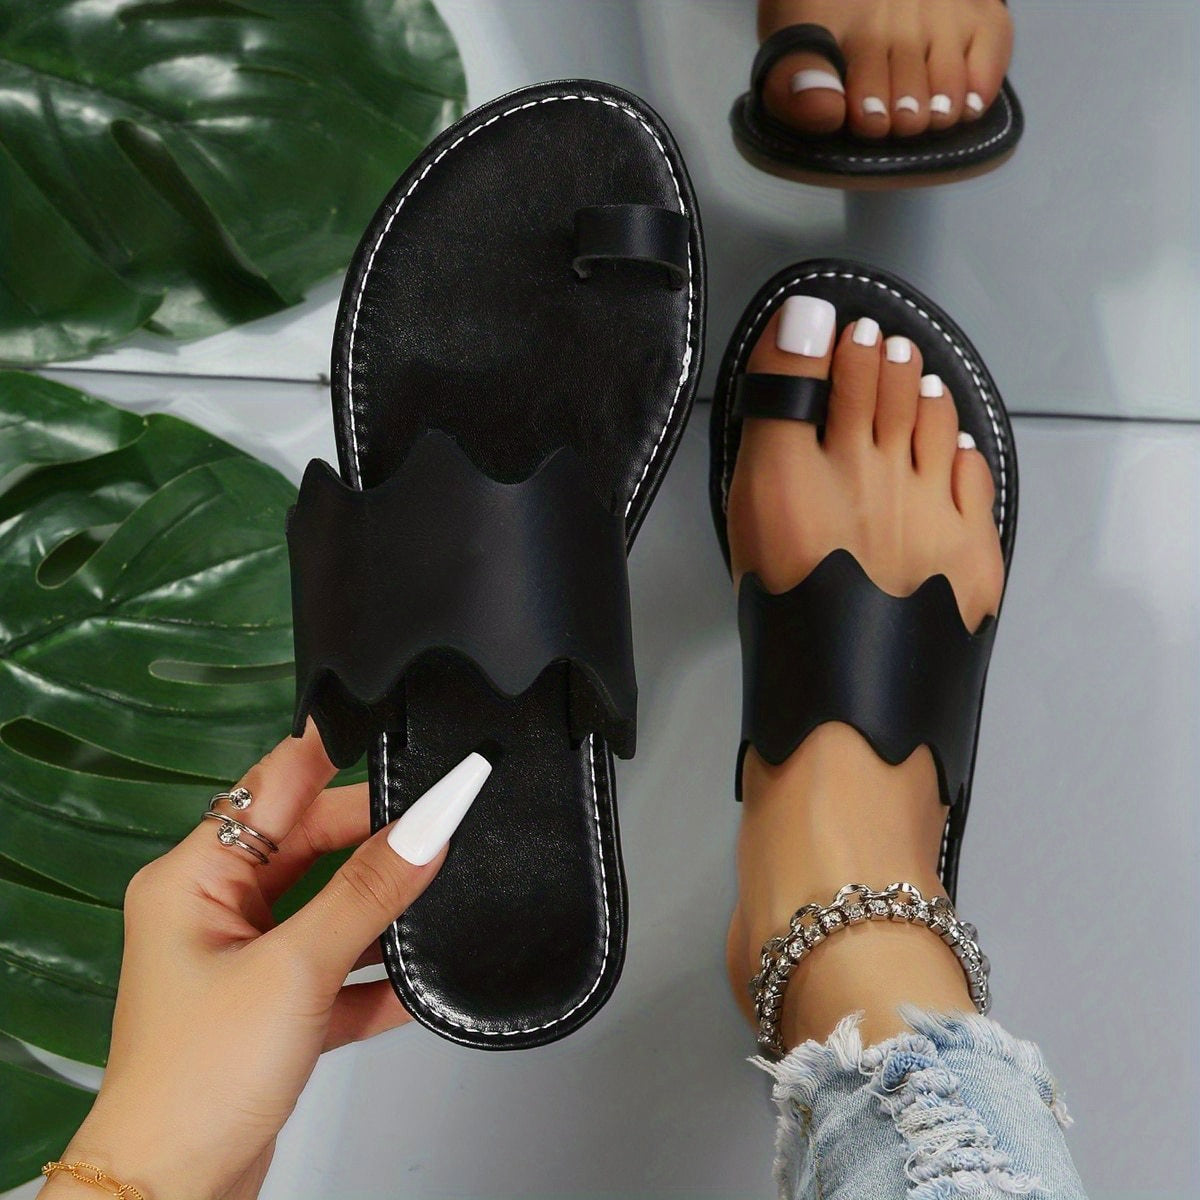 Non-Slip Black Flat Sandals for Women - Perfect for Beach and Outdoor Activities